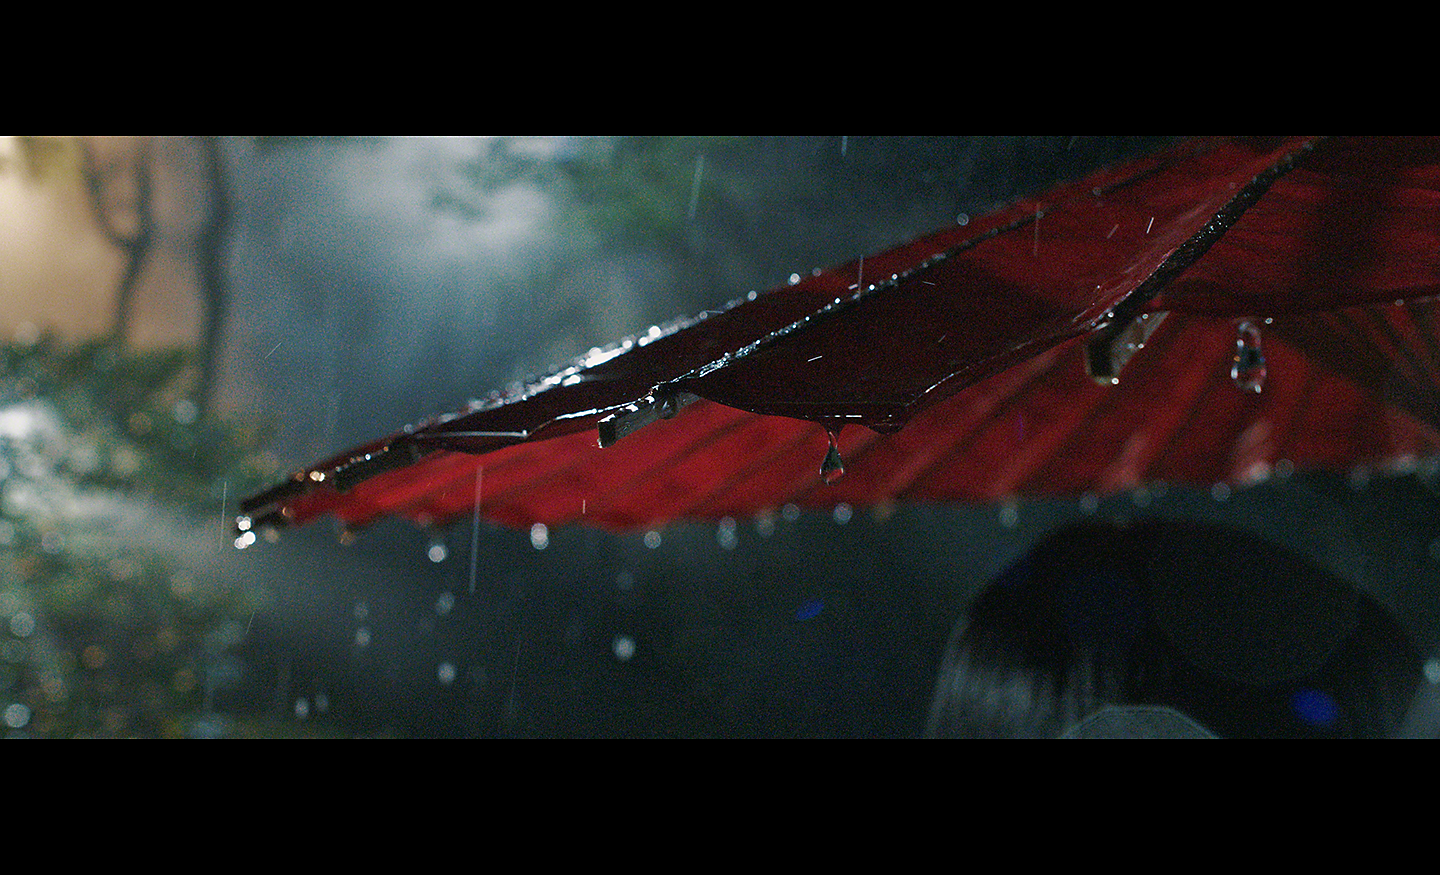 Low-light image of rain dripping off a red parasol